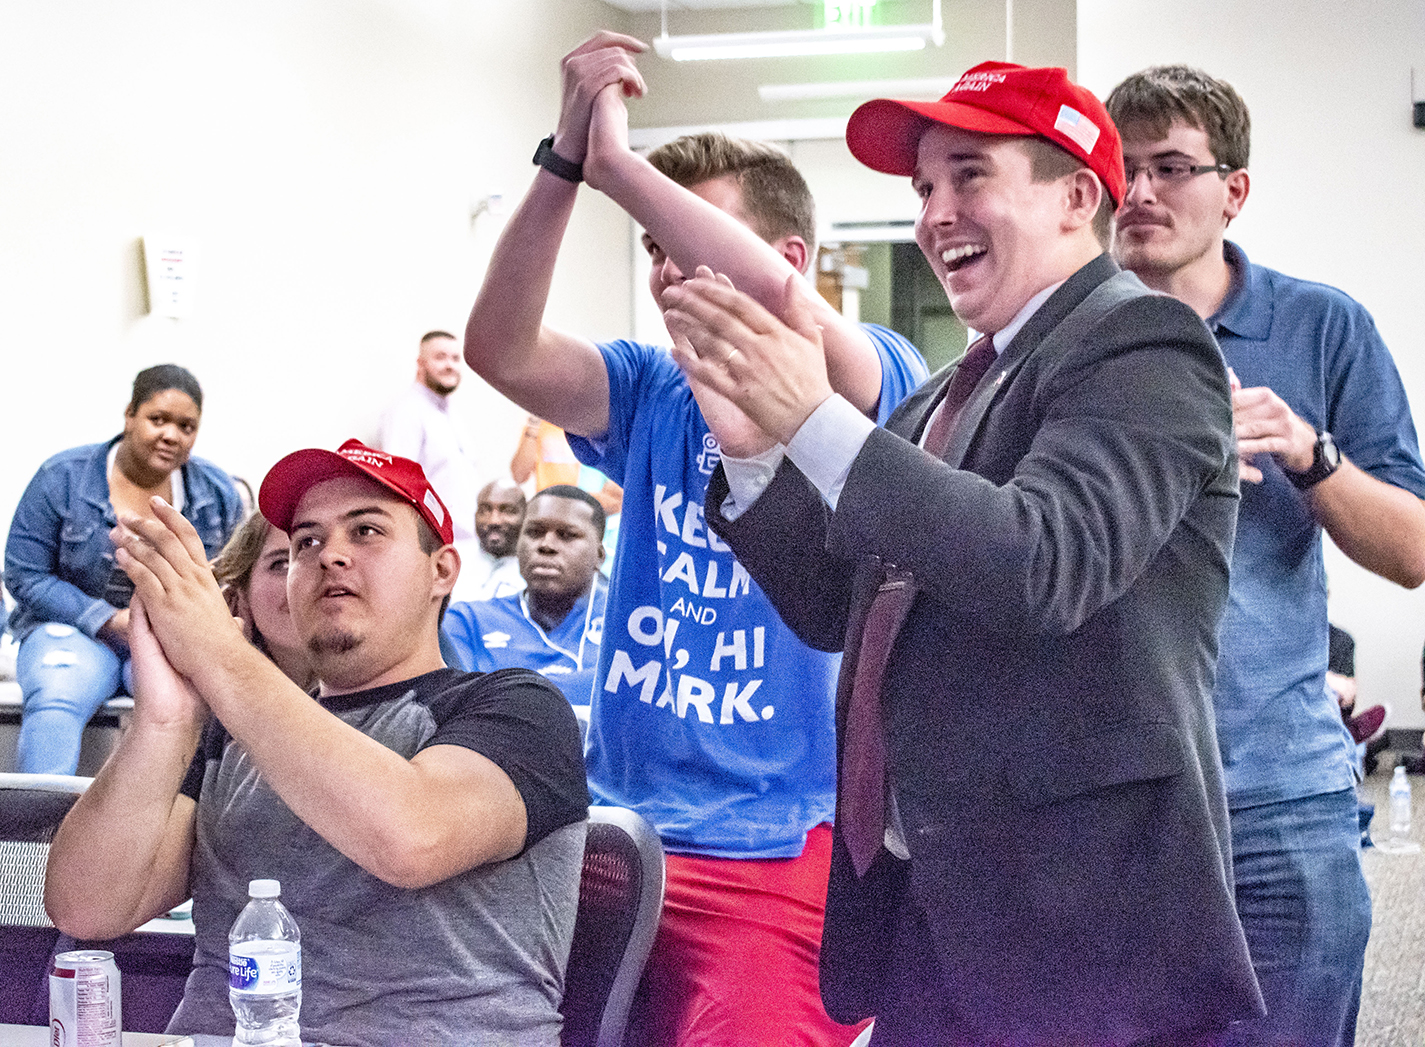 SE student Republicans celebrate as Ted Cruz starts to gain a lead against Beto O’Rourke in the U.S. Senate race at the Nov. 6 election watch party on SE Campus.